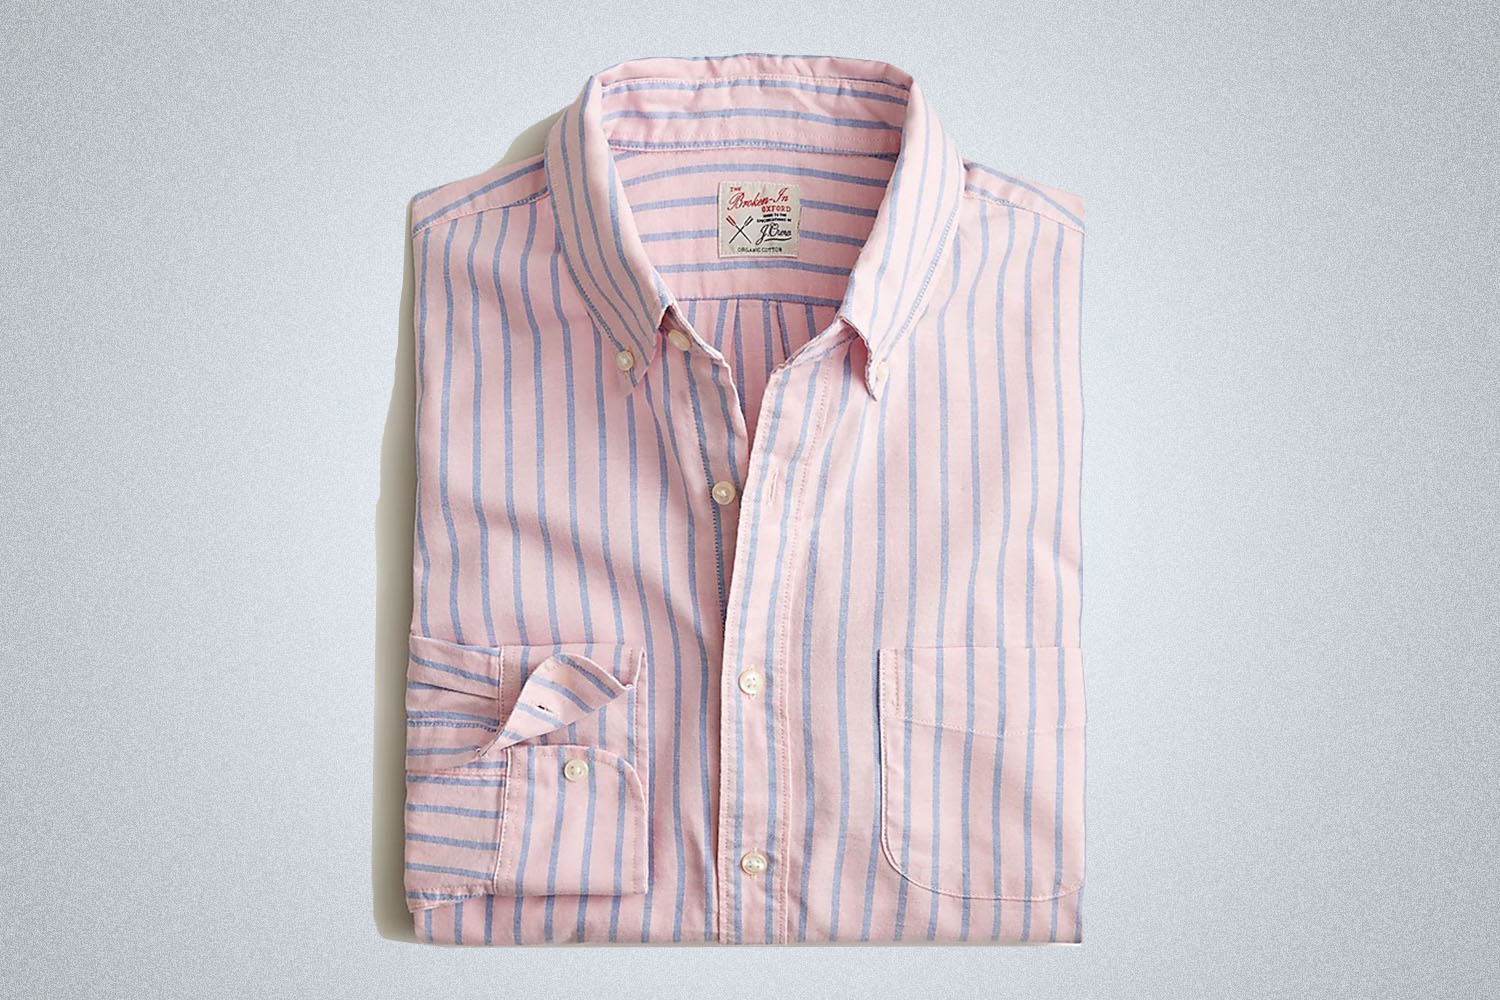 a pink and blue striped broken-in oxford shirt from J.Crew on a grey background